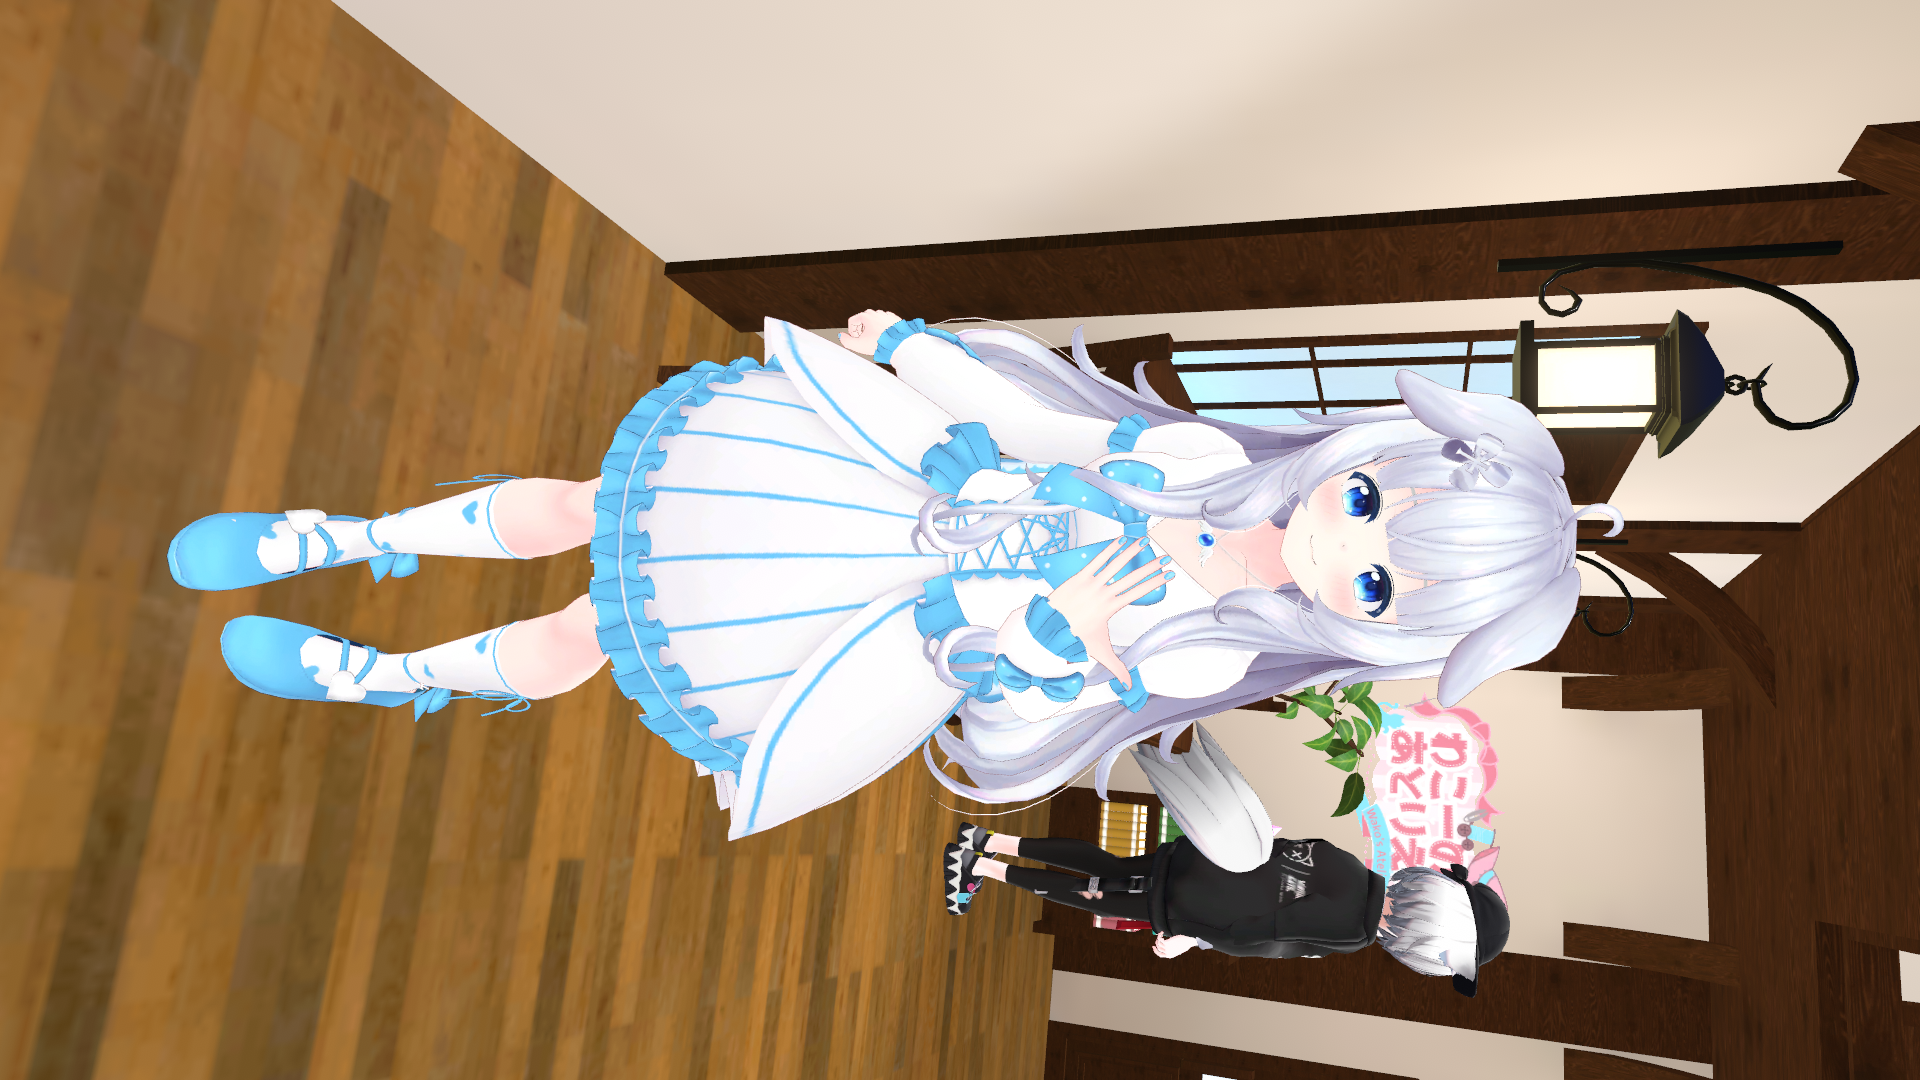 VRChat_1920x1080_2021-12-05_02-30-17.144.png